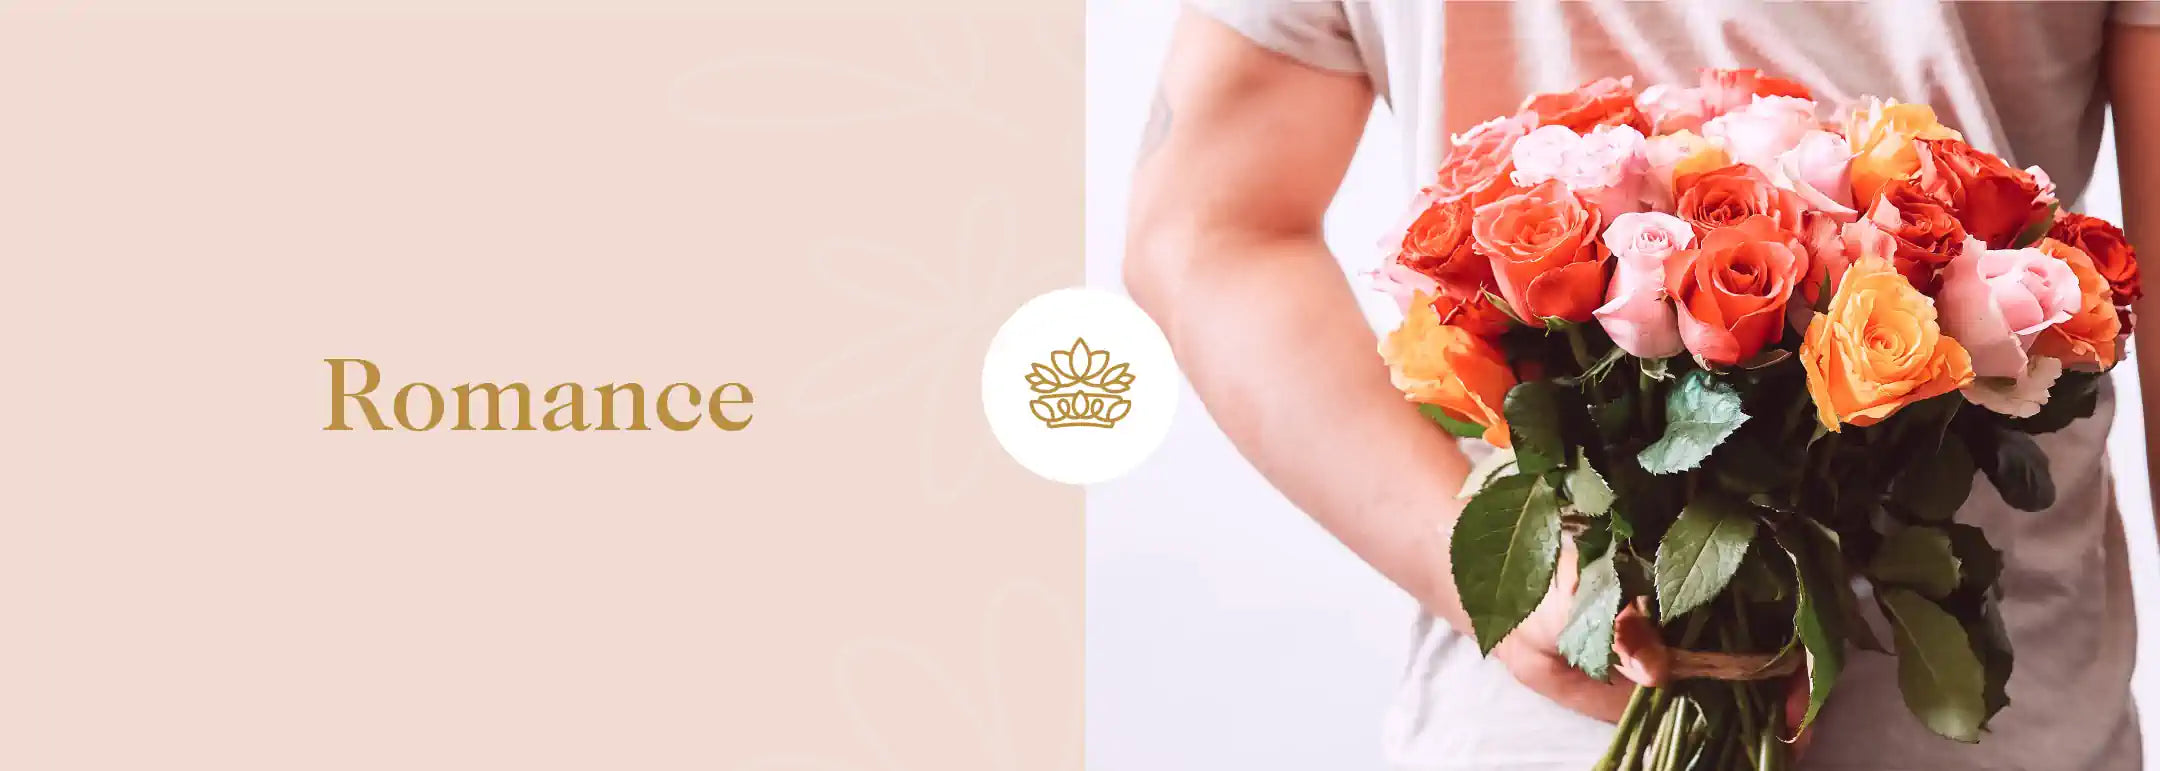 A vibrant mix of roses in shades of pink, orange, and coral cradled in a loving embrace, encapsulating the essence of romance, accompanied by a flower crown emblem - Fabulous Flowers and Gifts.